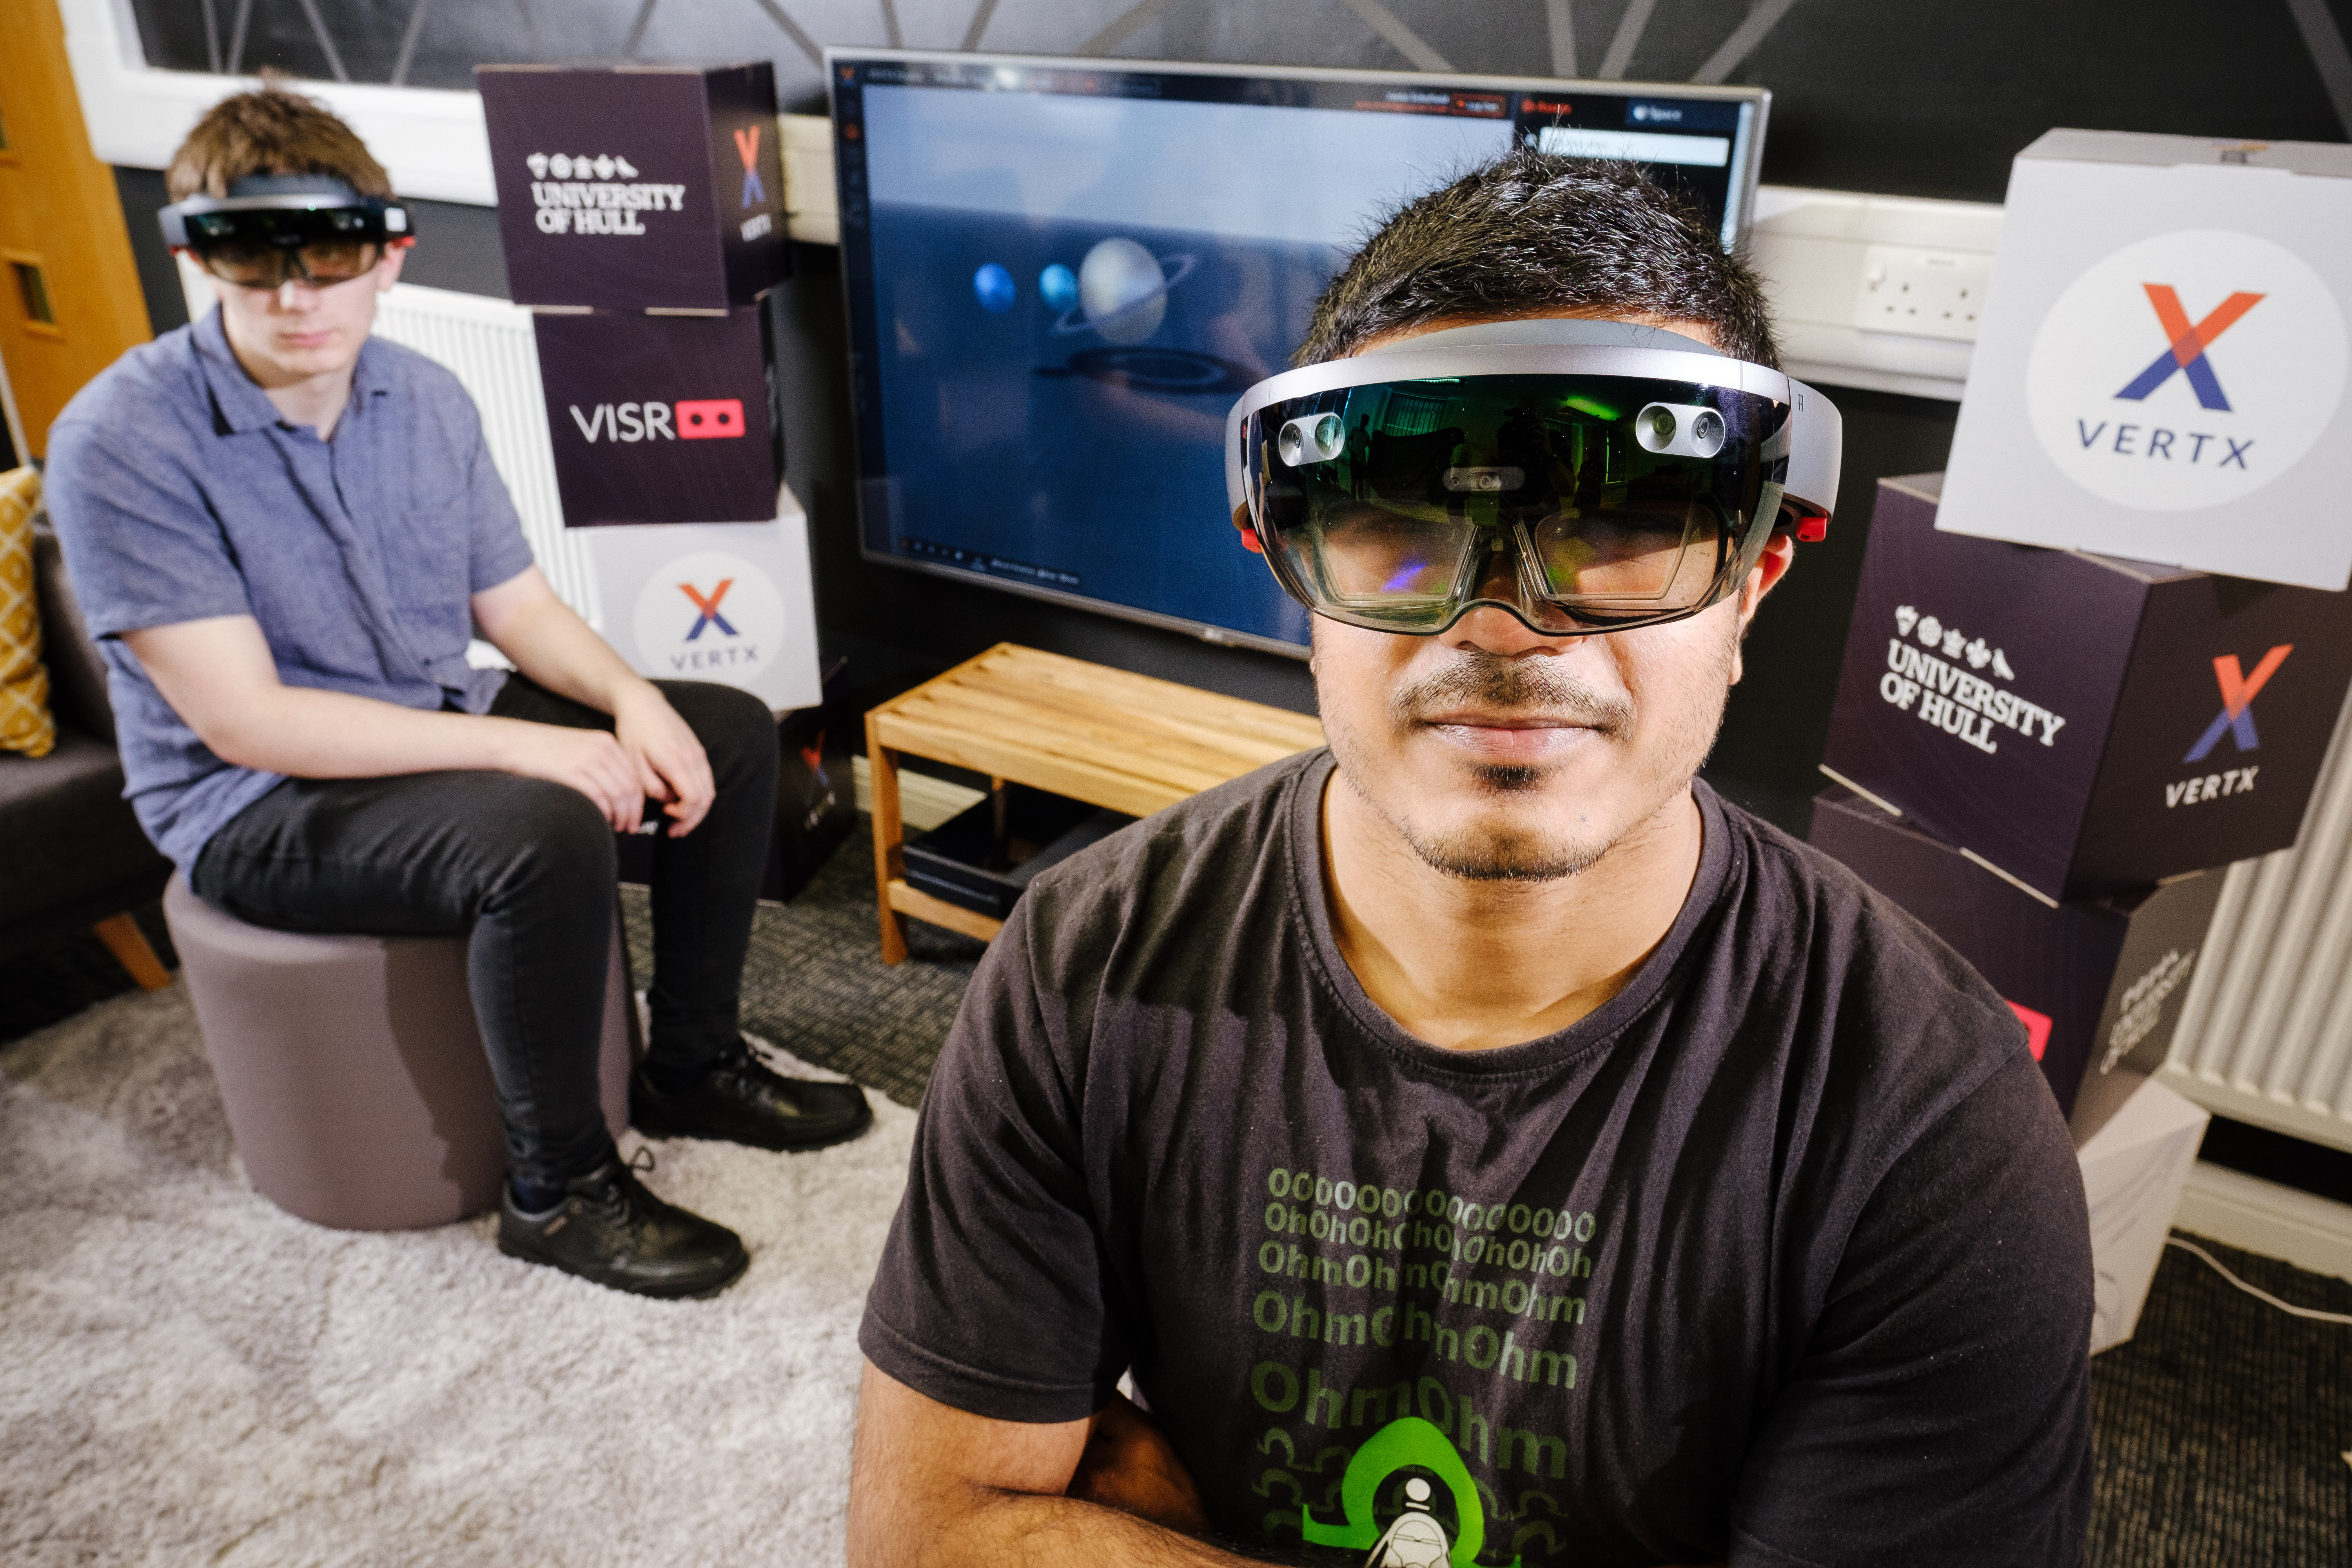 University of Hull Enterprise Centre, Kingston Upon Hull, East Yorkshire, United Kingdom, 18 June, 2018. Pictured: LtoR Josh Grierson, Arjun Chauhan, Students interacting with the HoloLens/VERTX technology being pioneered by the VISR.